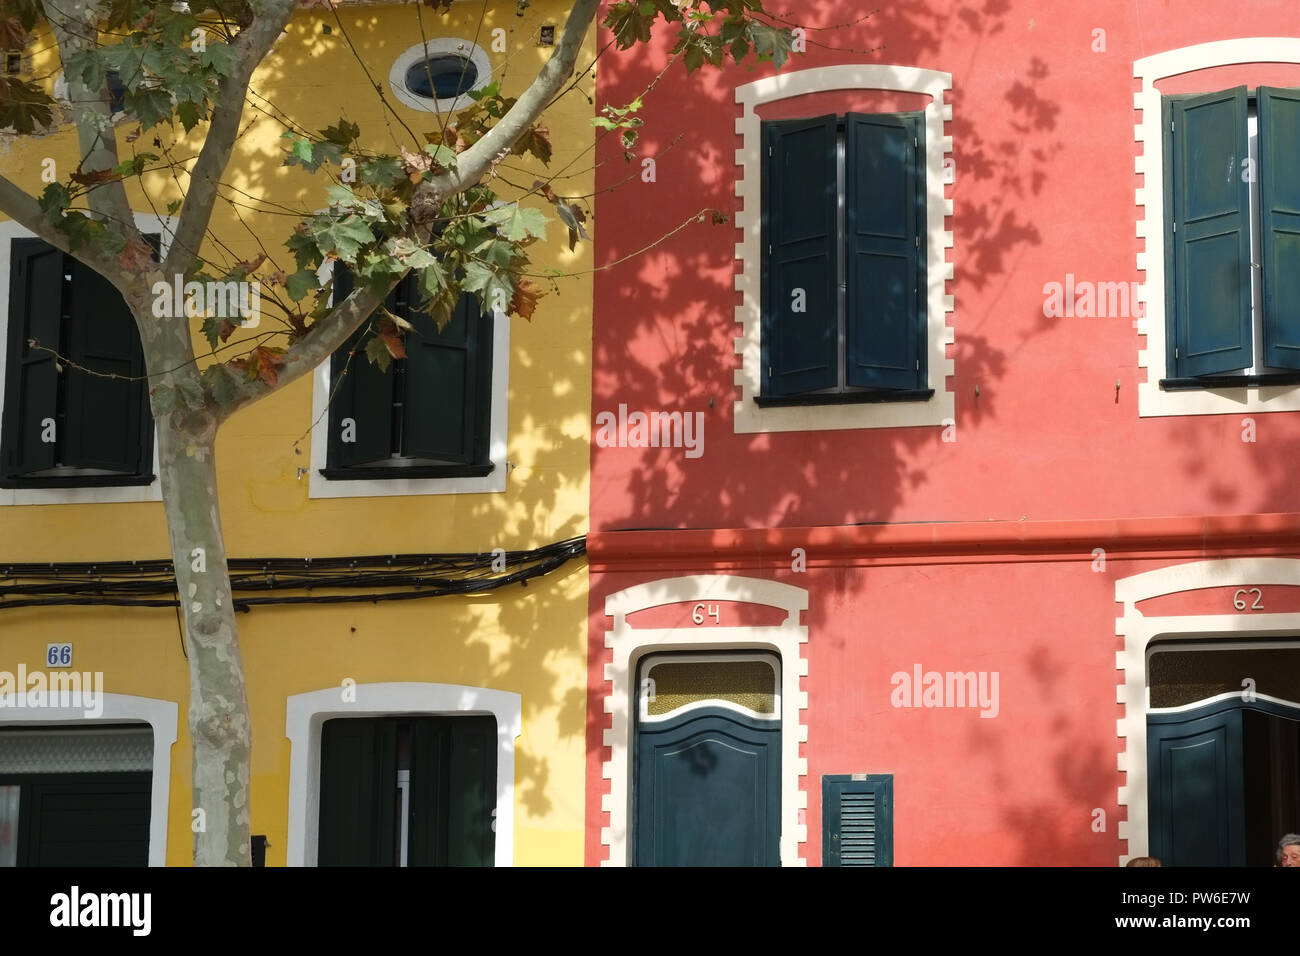 Shadows of trees fall across the colourful terraced houses and shutters in Carrer Victori, Es Castell, Menorca, Spain Stock Photo